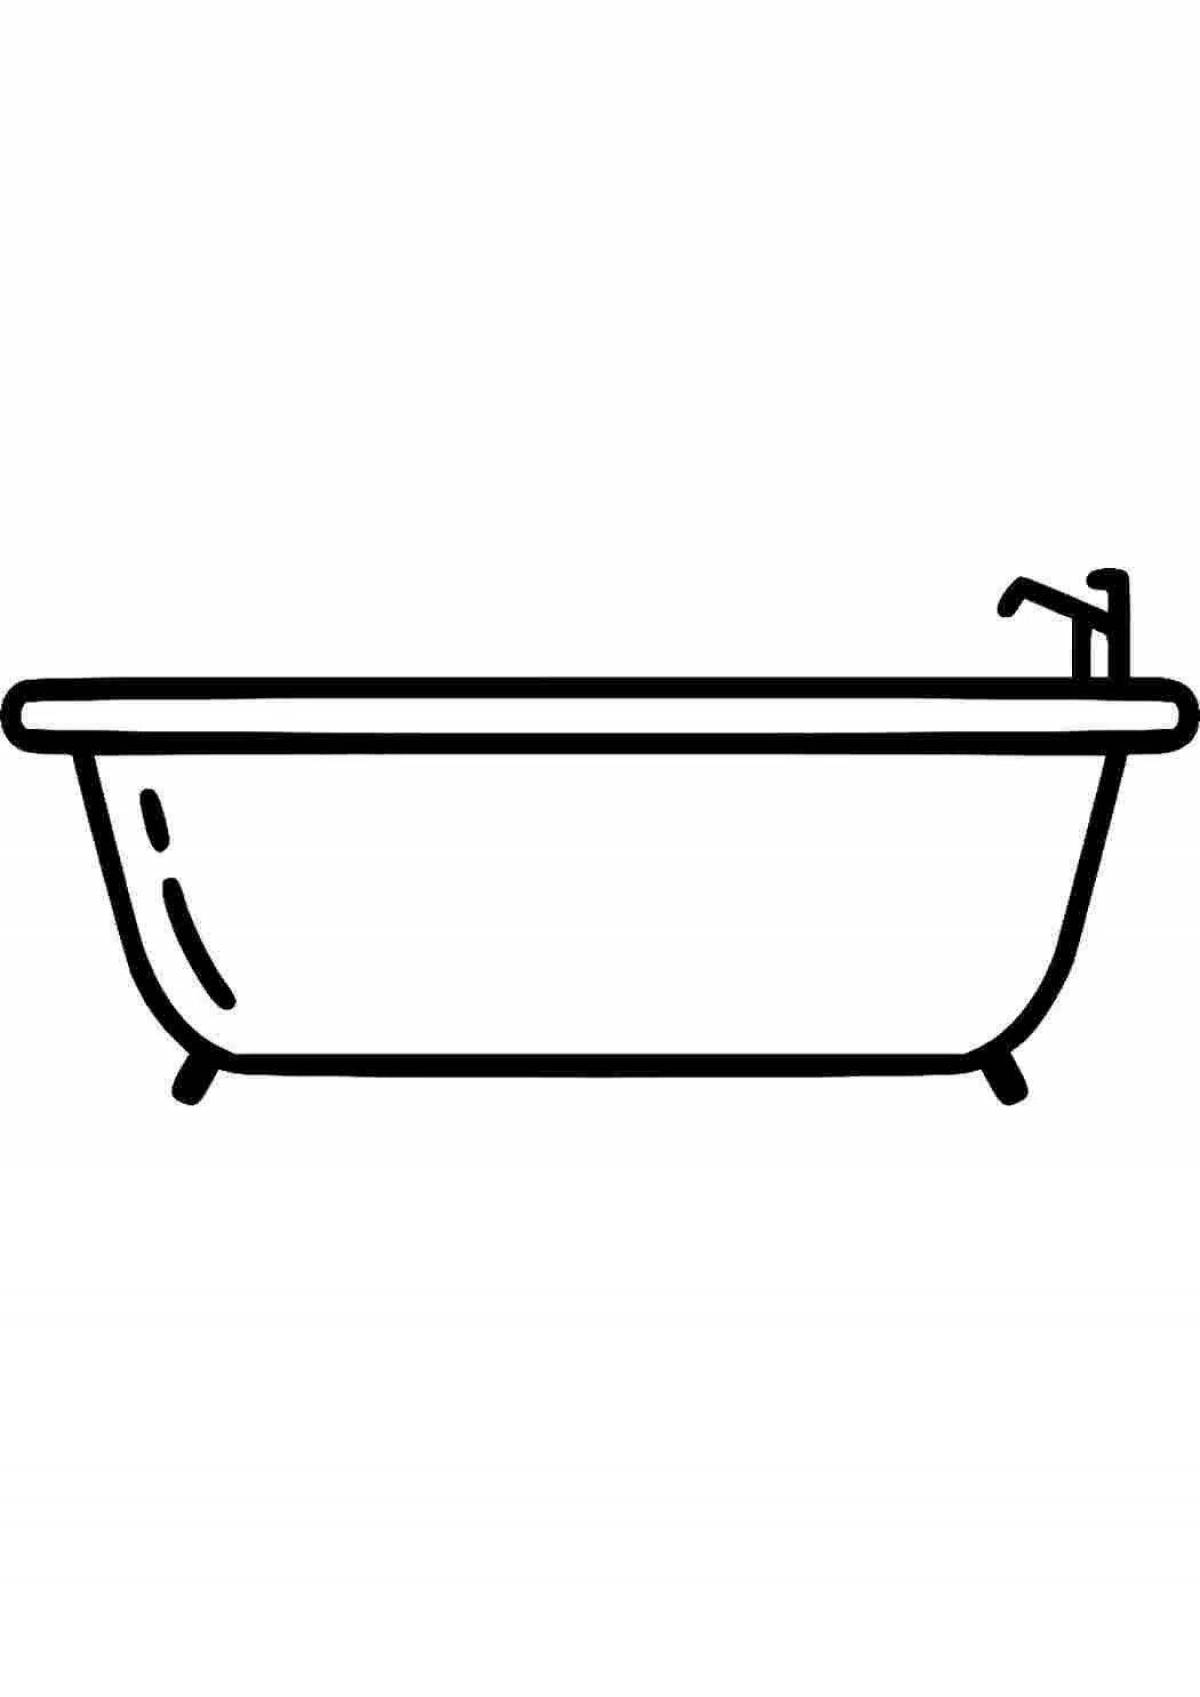 Shining bathtub coloring book for kids